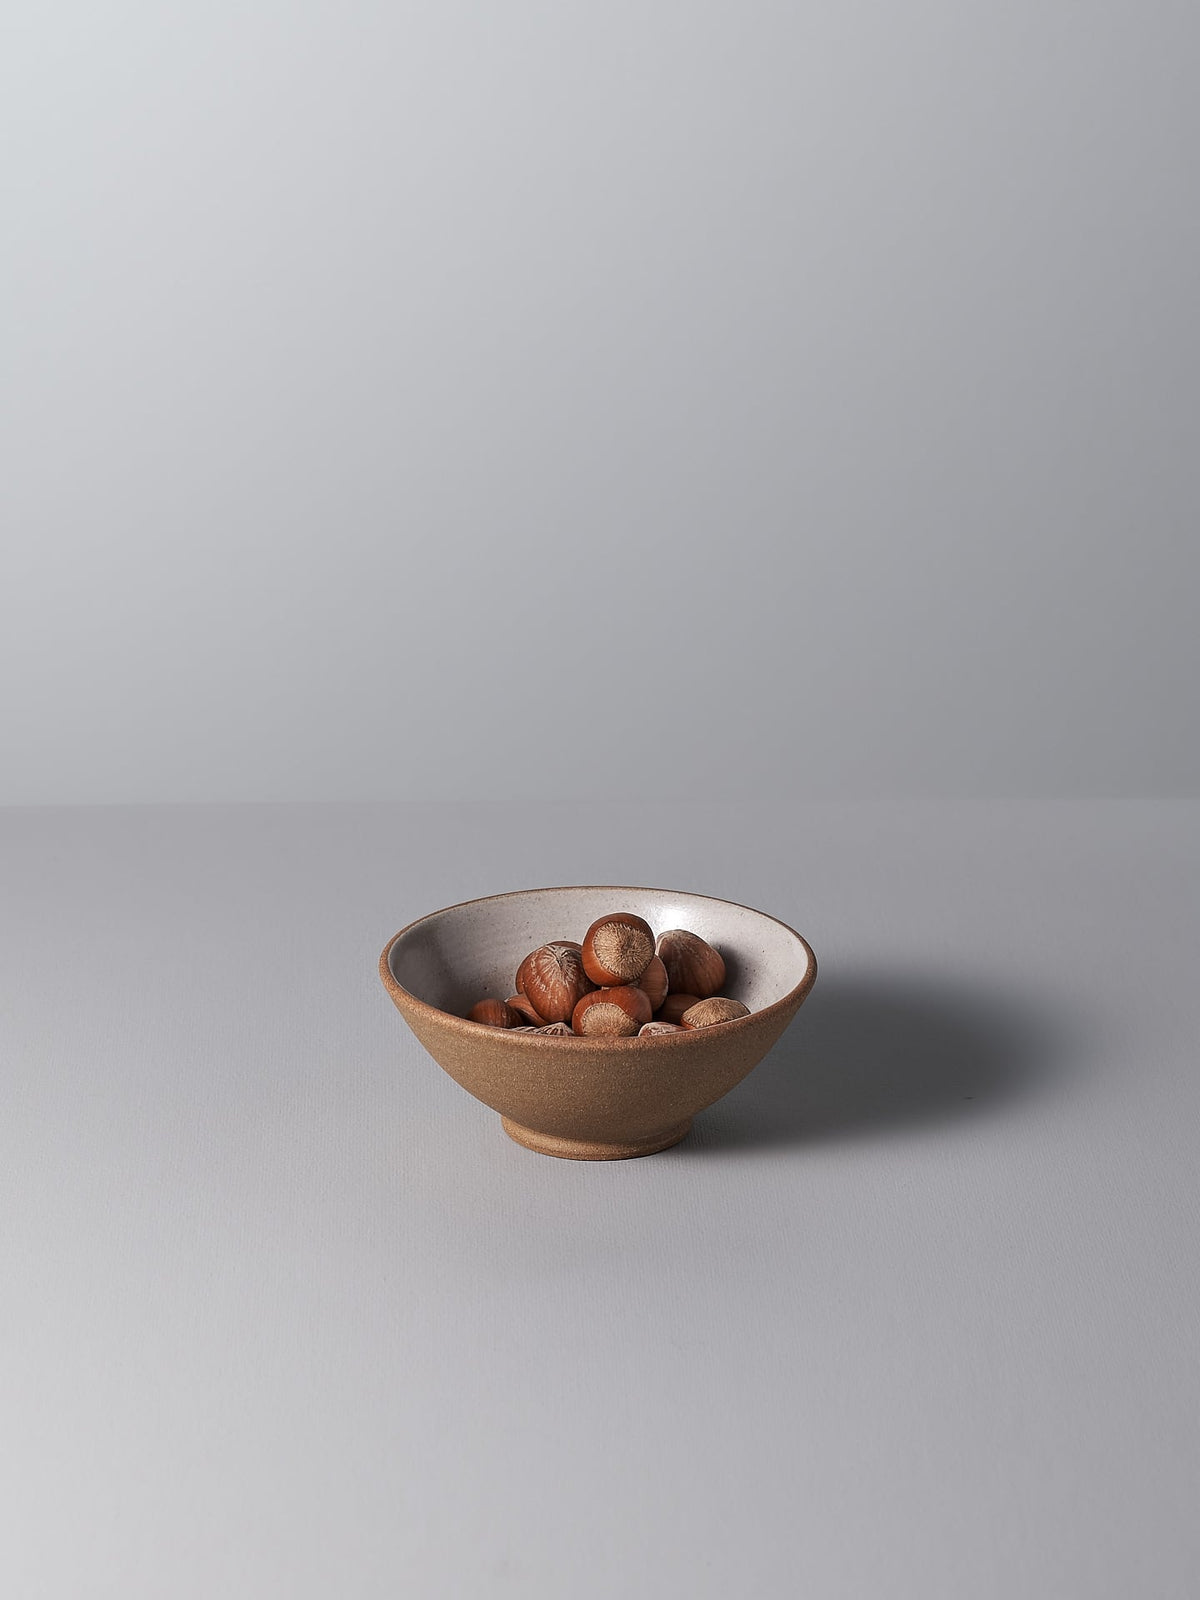 A Nicola Shuttleworth Condiment Bowl – Small filled with hazelnuts on a grey surface.